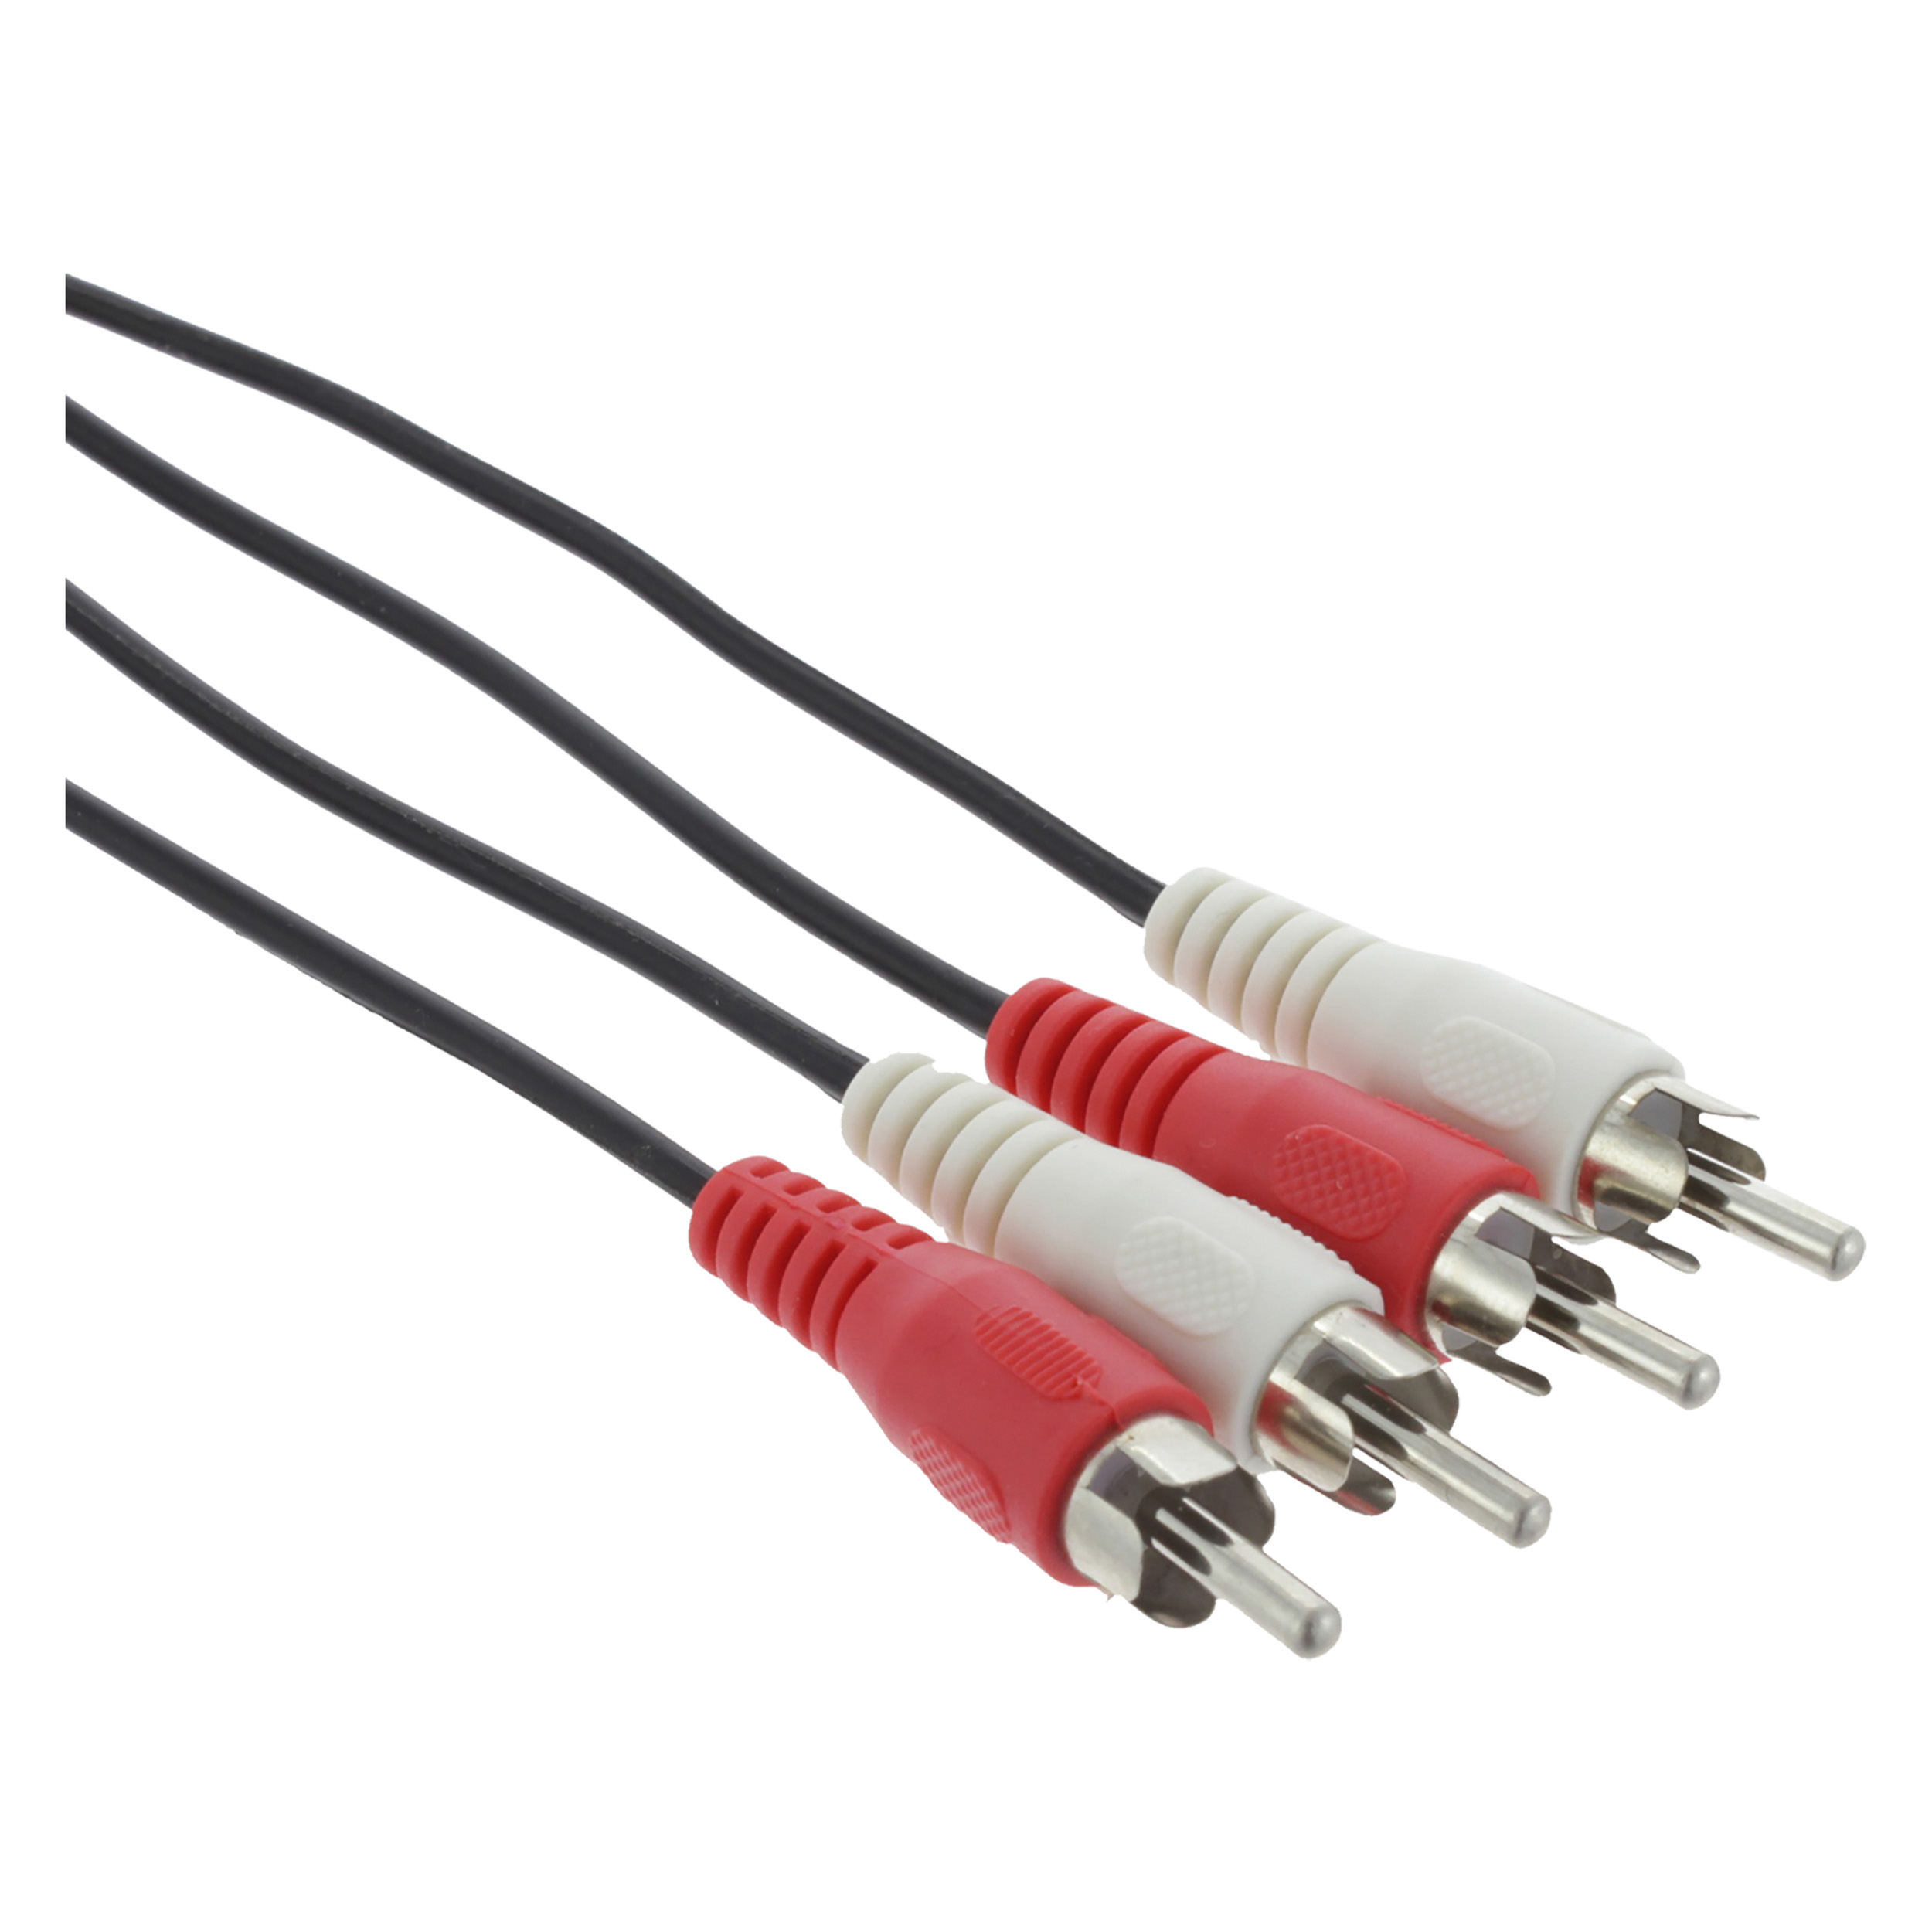 00.131.62 Q-Link  tulp kabel 2 RCA-male - 2 RCA-male - 3 m - rood-wit